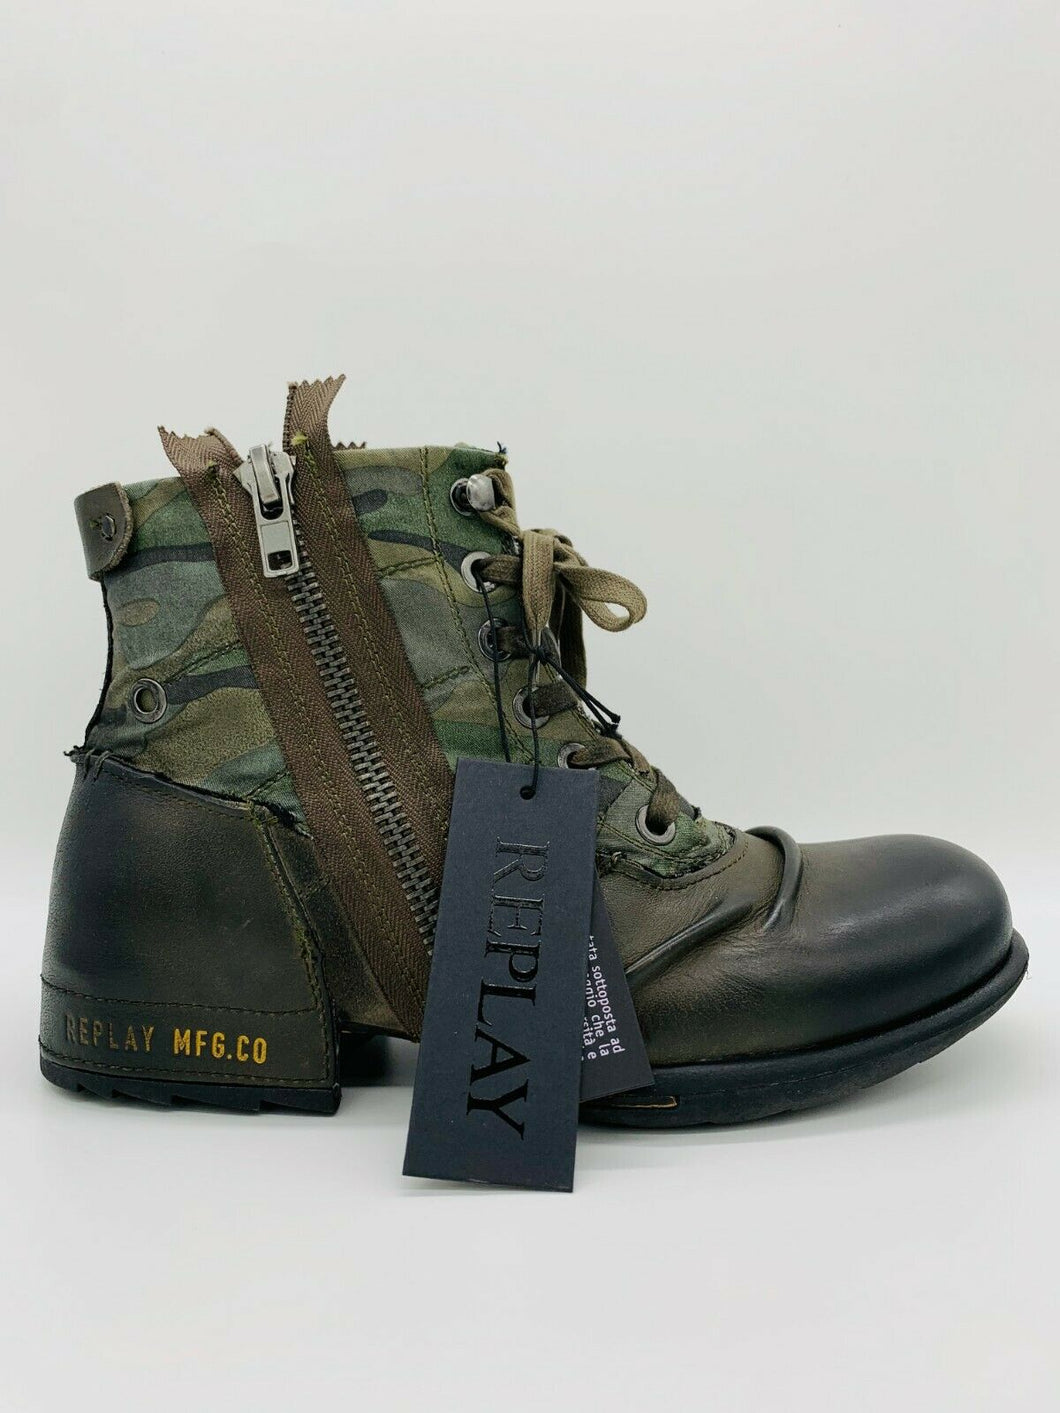 Replay Herrenschuhe Shoes Stiefeletten Schuhe Boots Clutch Military Green Camou